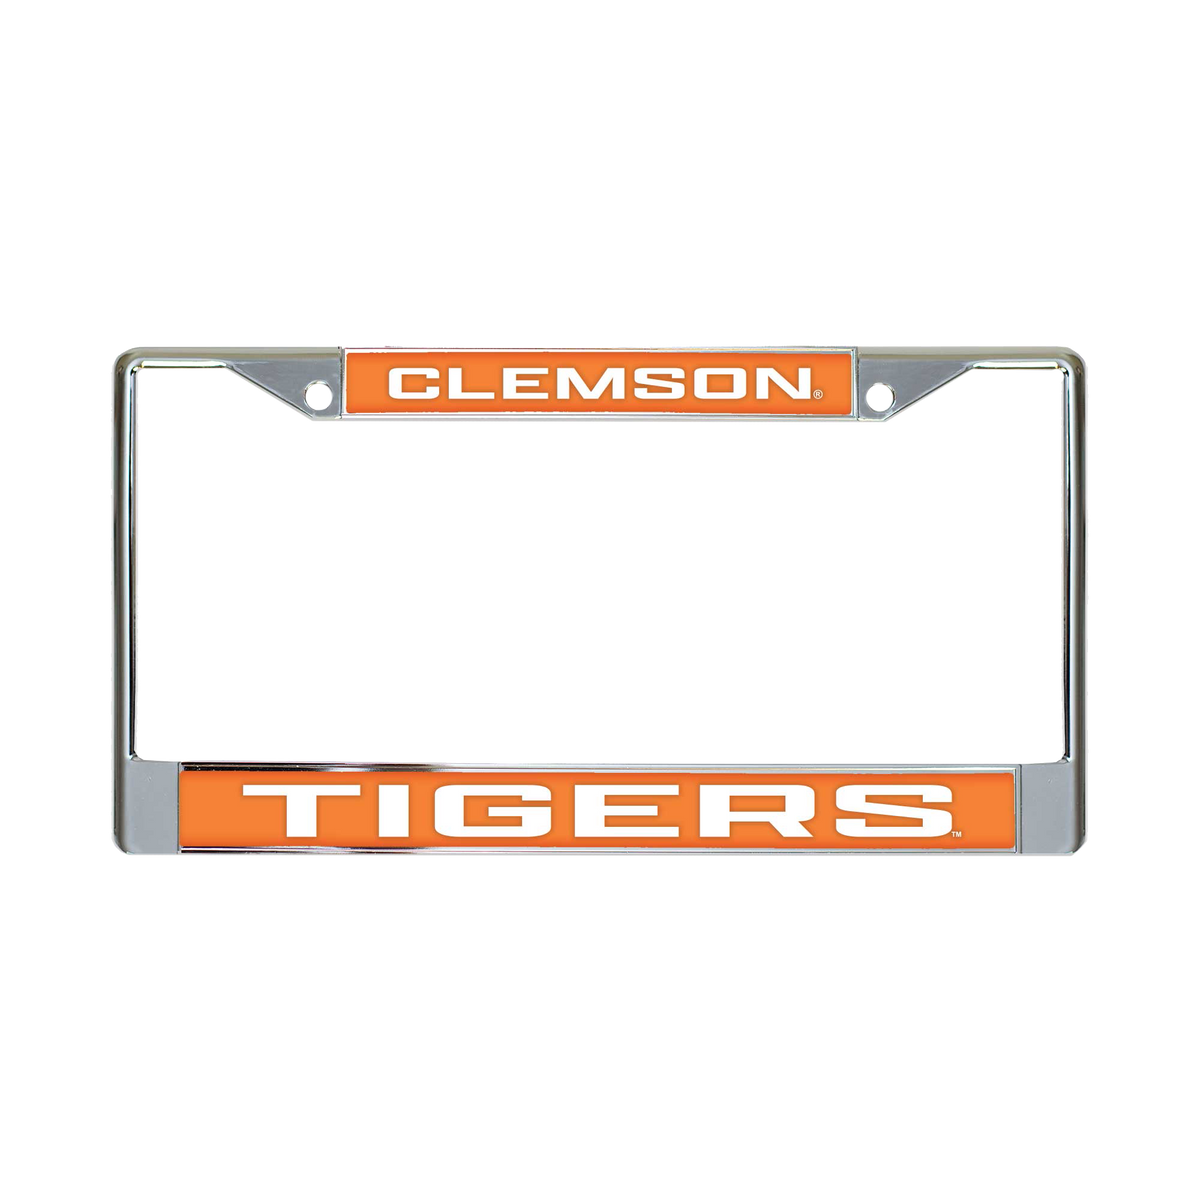 Clemson Tigers Acrylic License Plate Frame